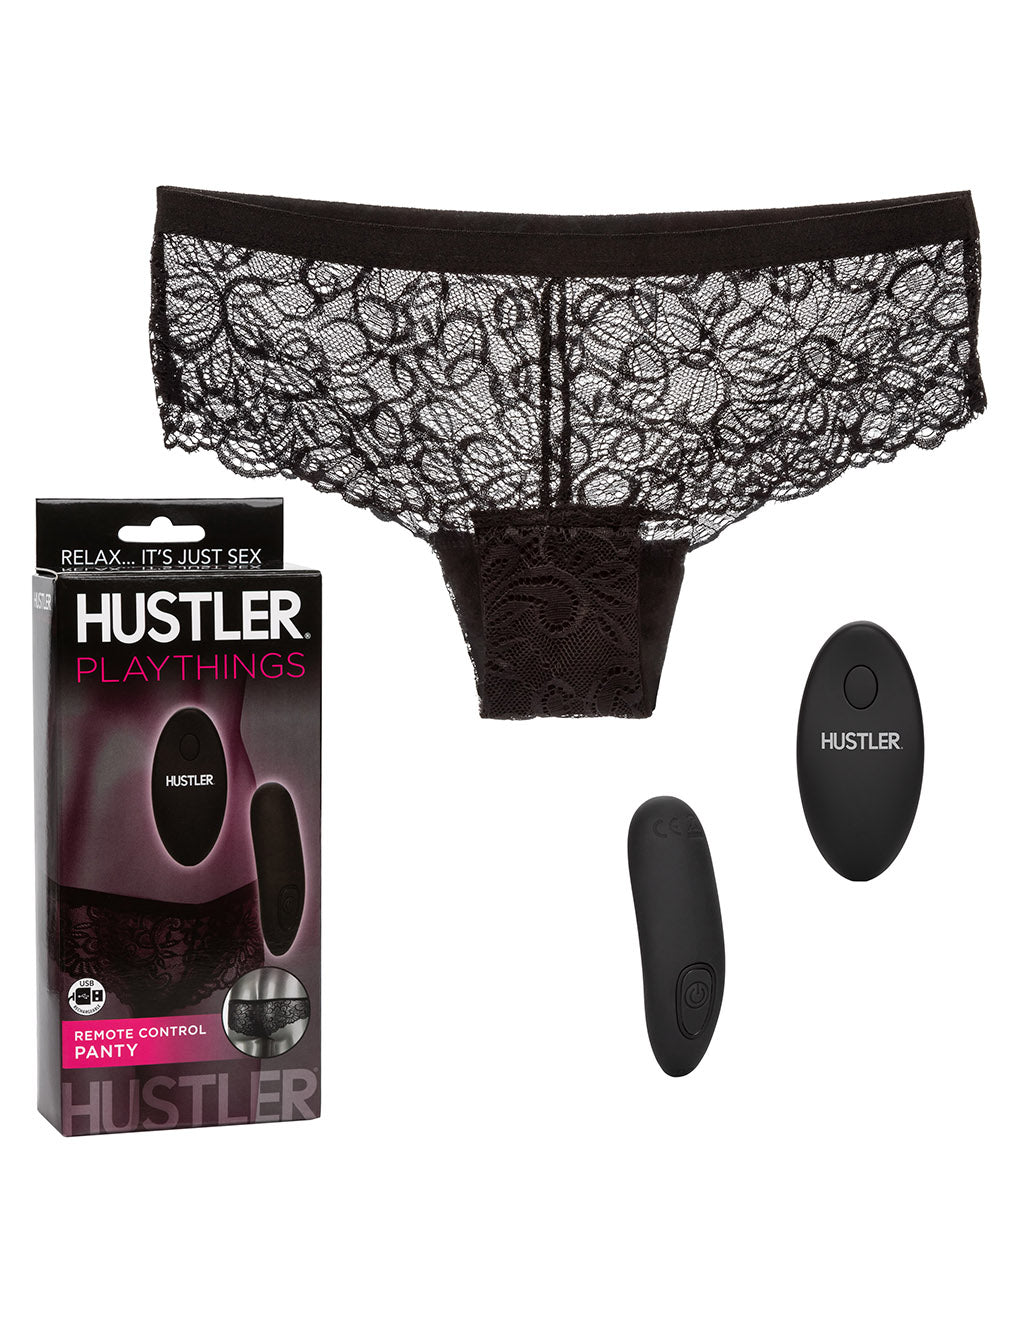 HUSTLER® Playthings Remote Control Panty- Box Contents